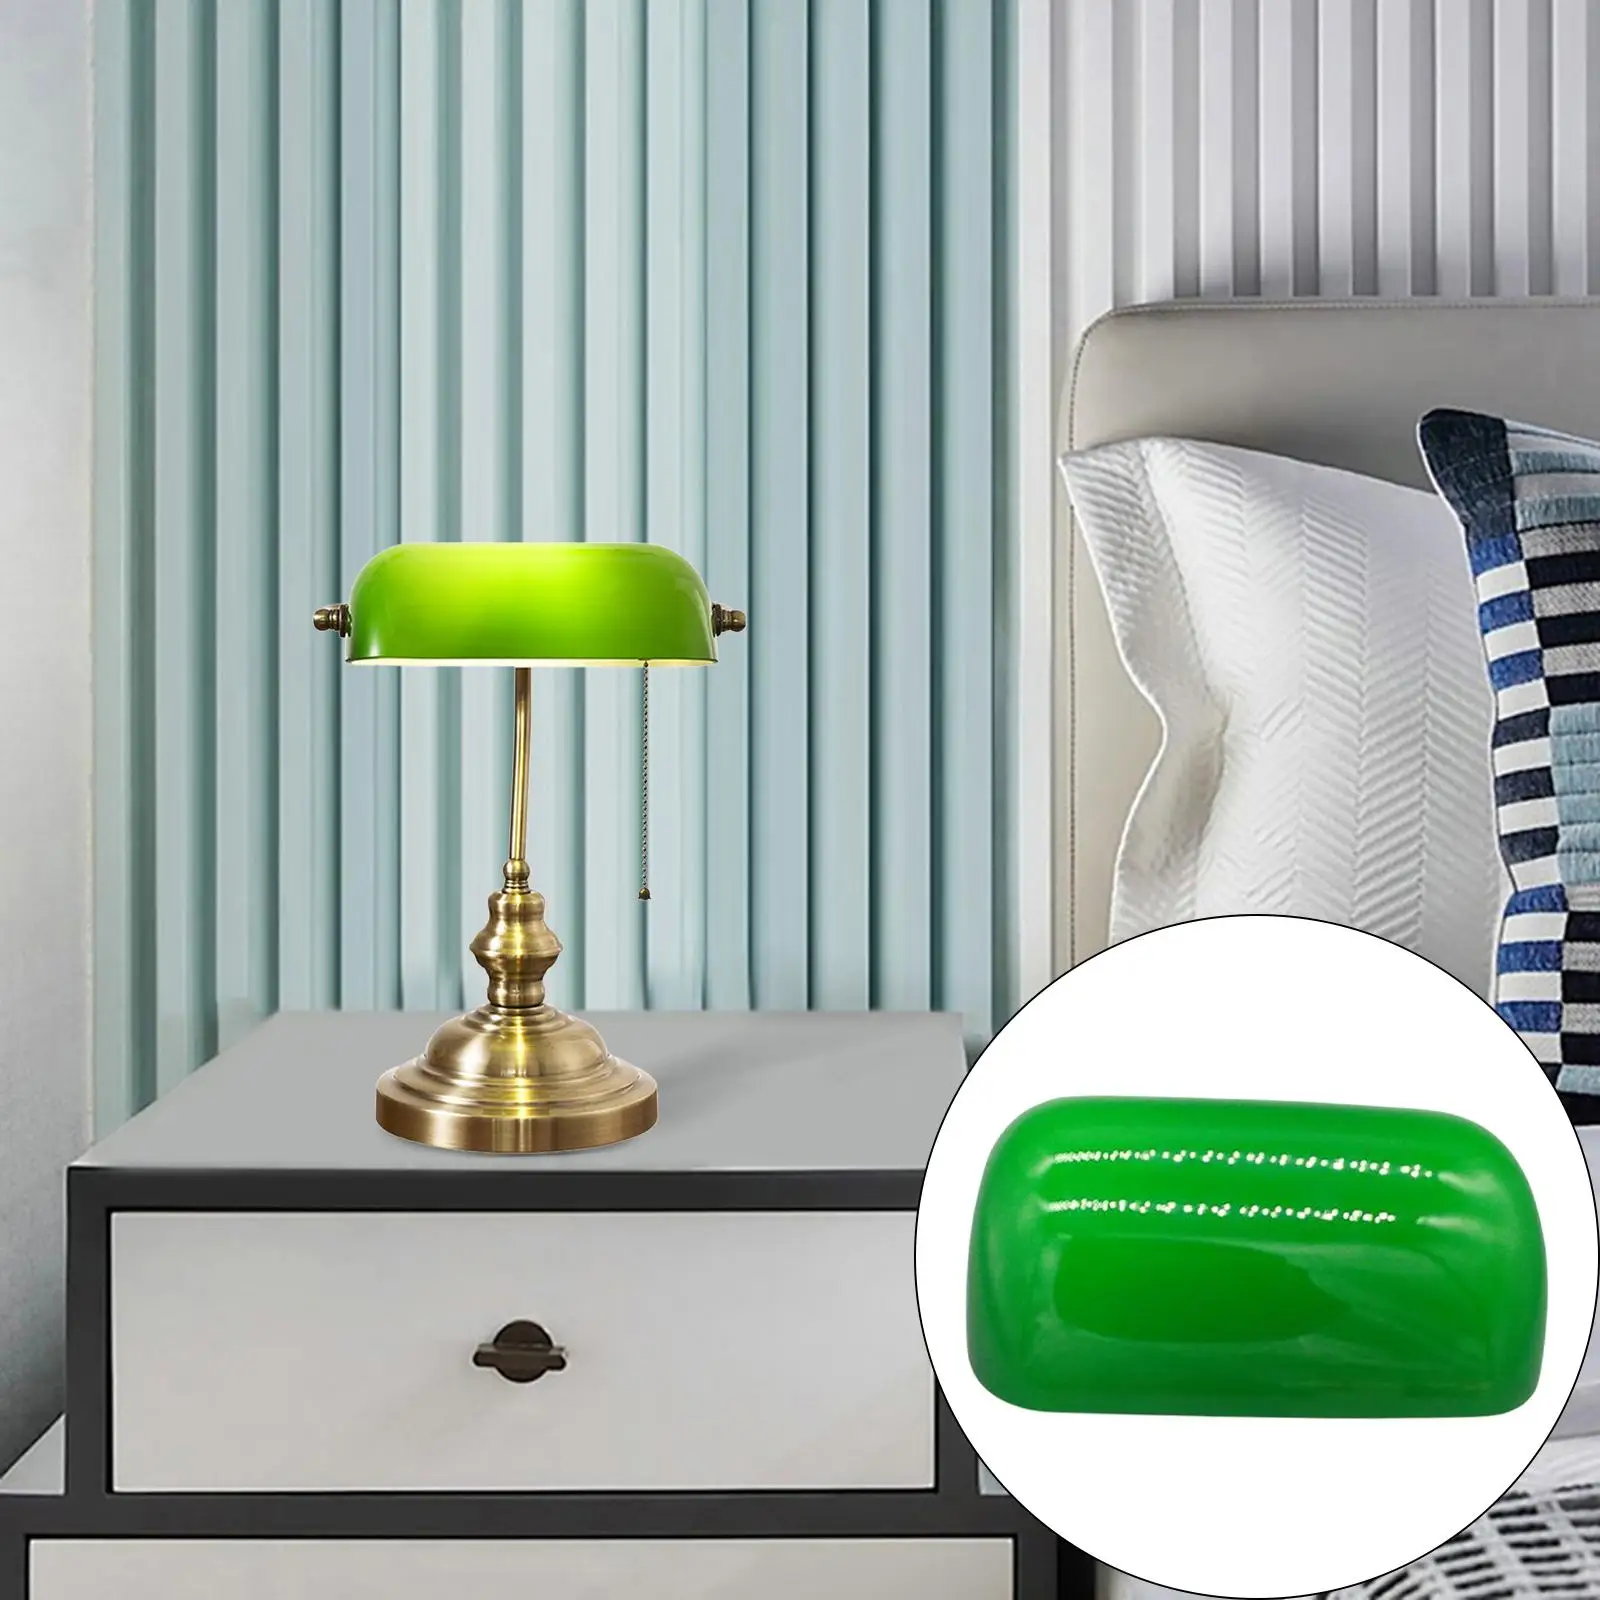 Classic Green Glass Bankers Lamp Shade Replacement Cover Lampshade for Bedside Living Room